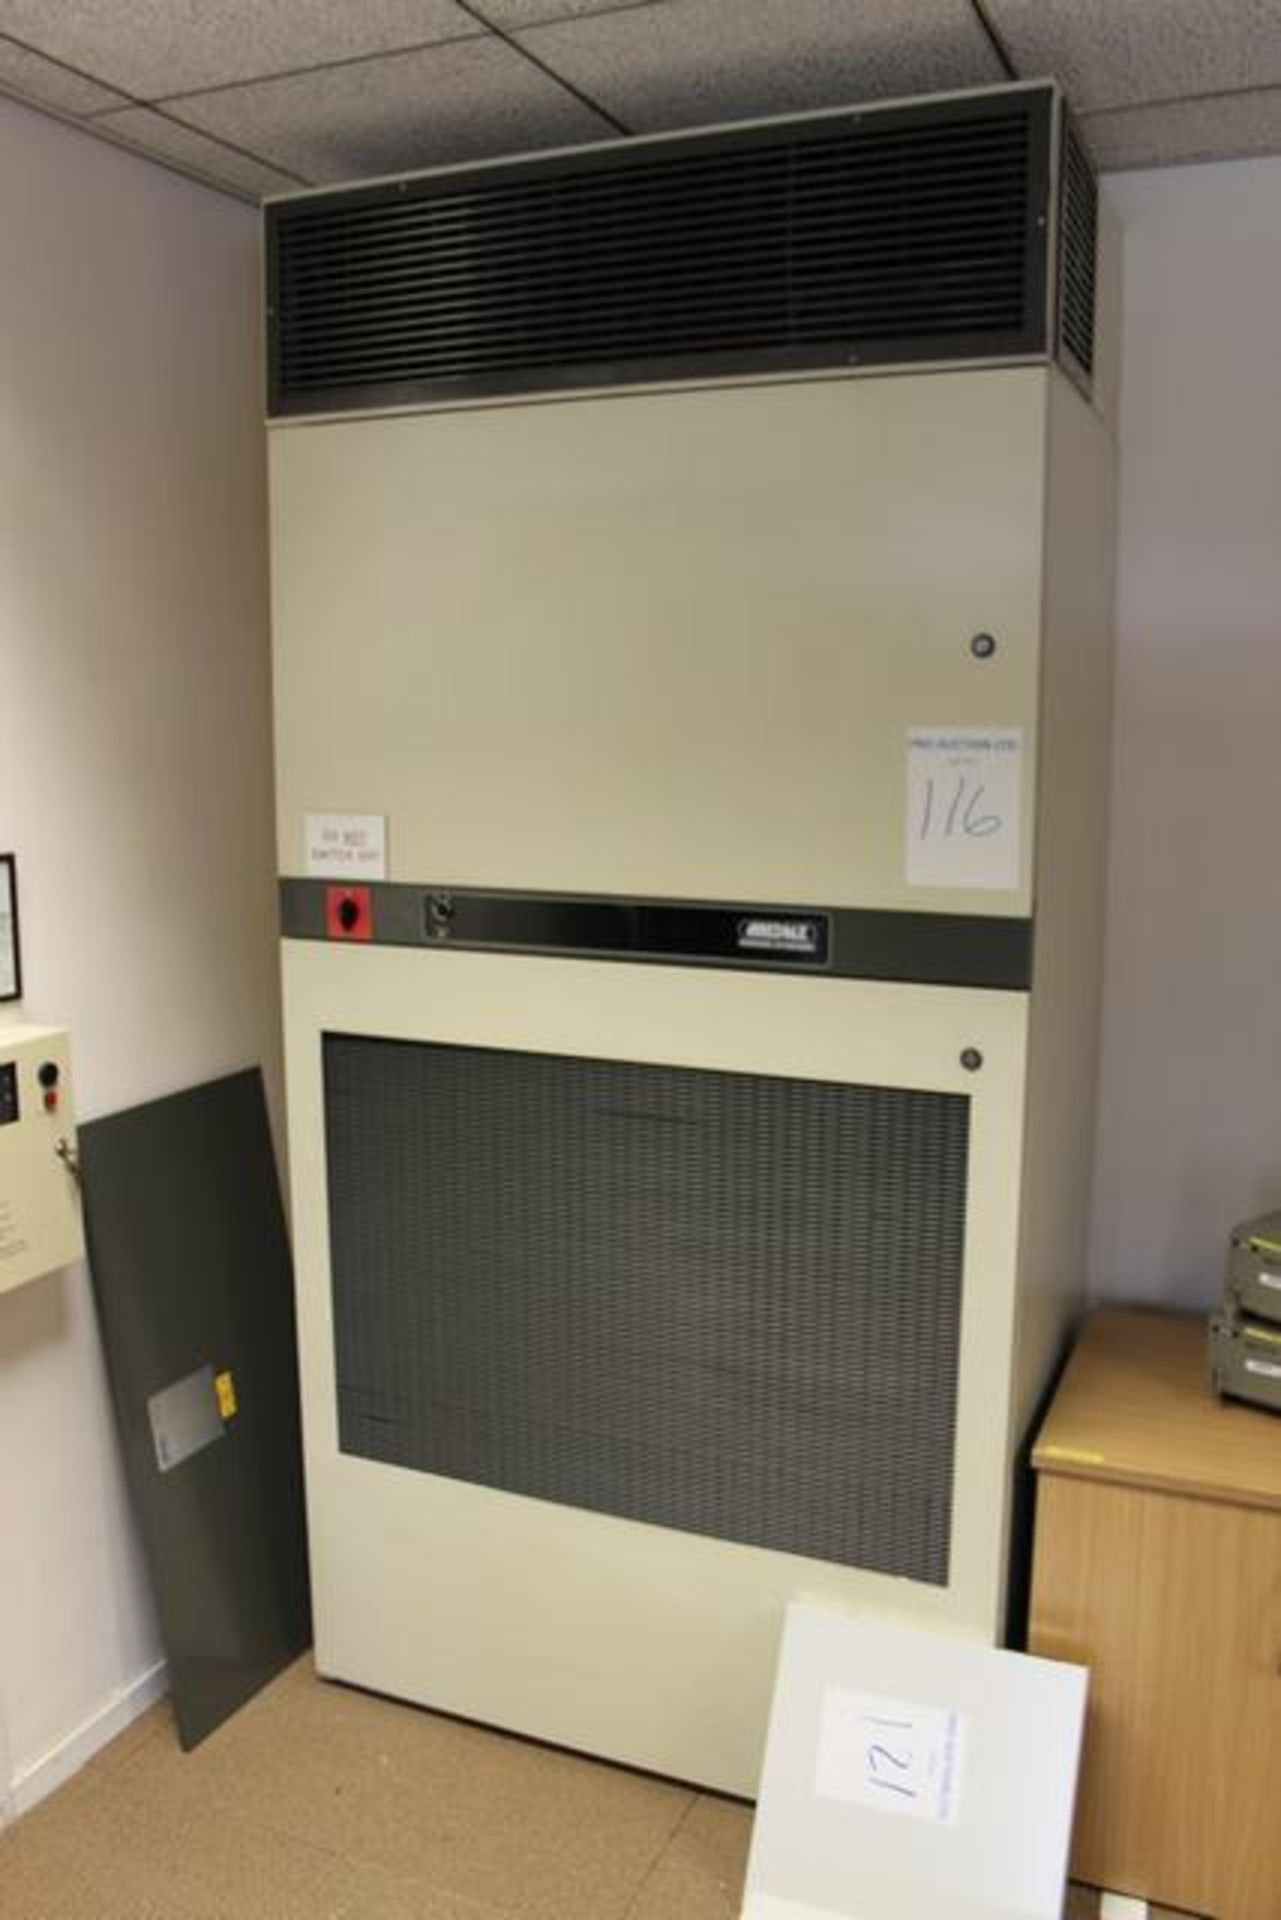 Airedale Precision air conditioning unit self-contained secure, tamper-proof fixings up flow